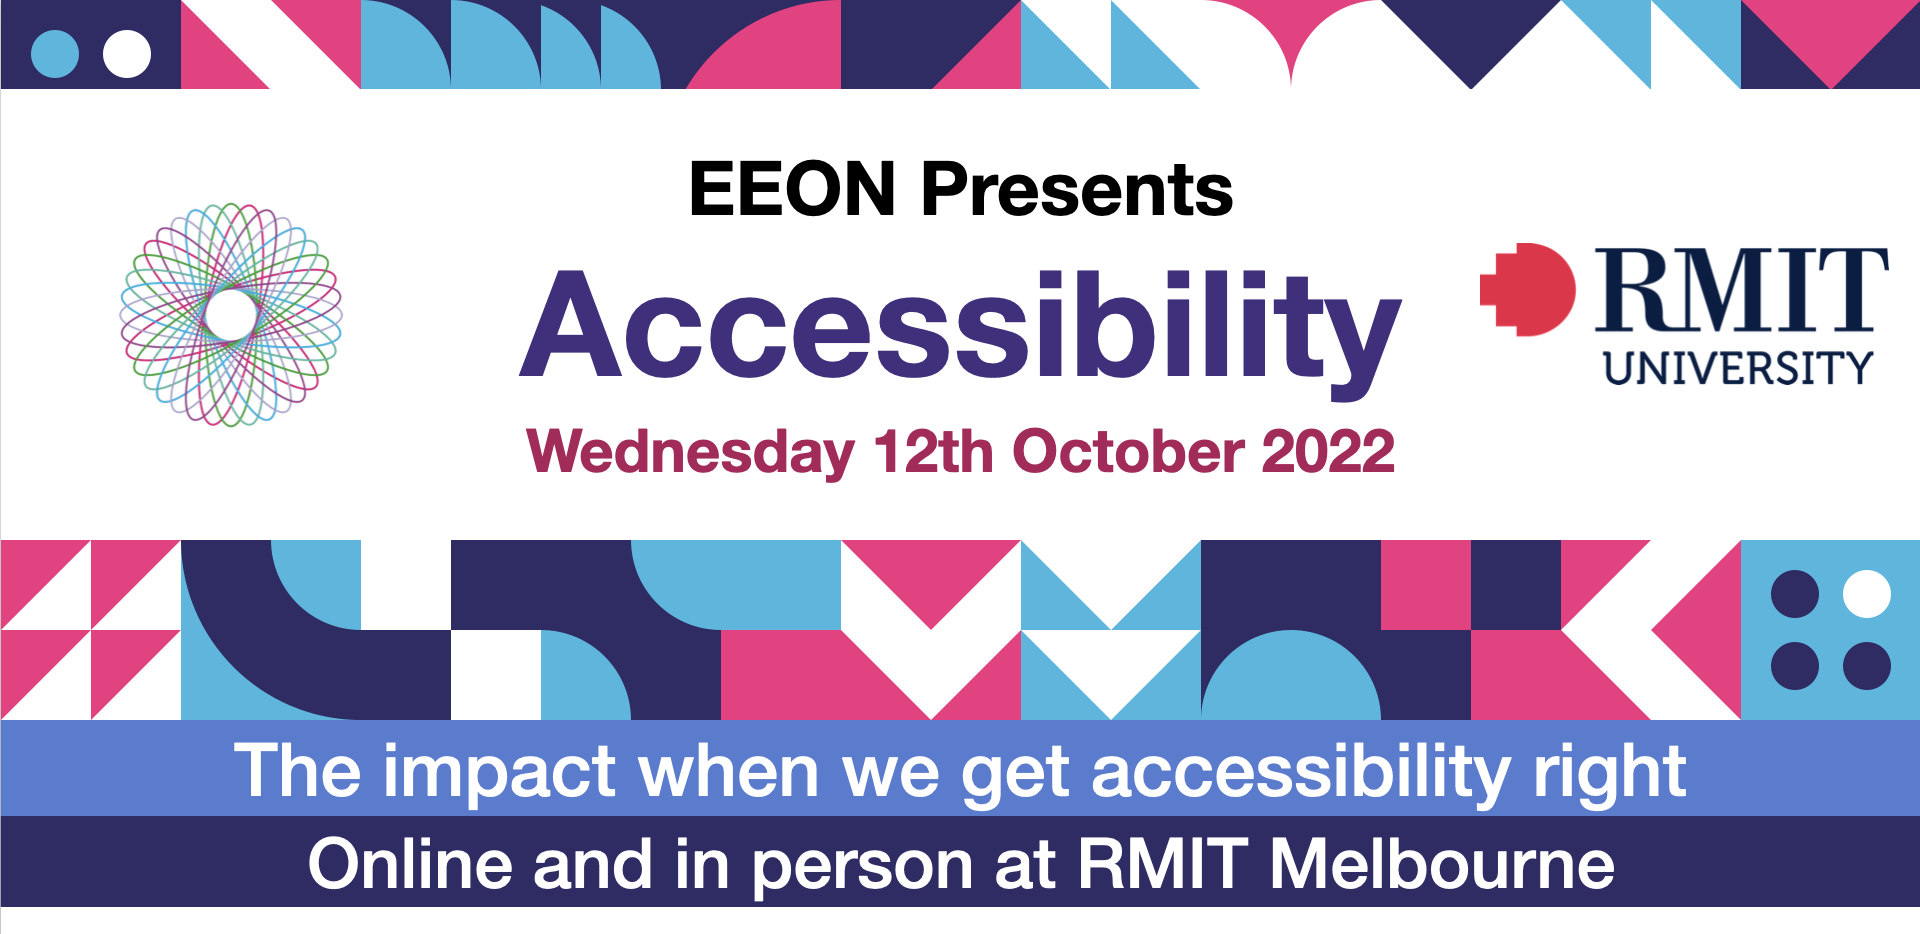 EEON Presents Accessibility: stories from people about the impact when we get it right